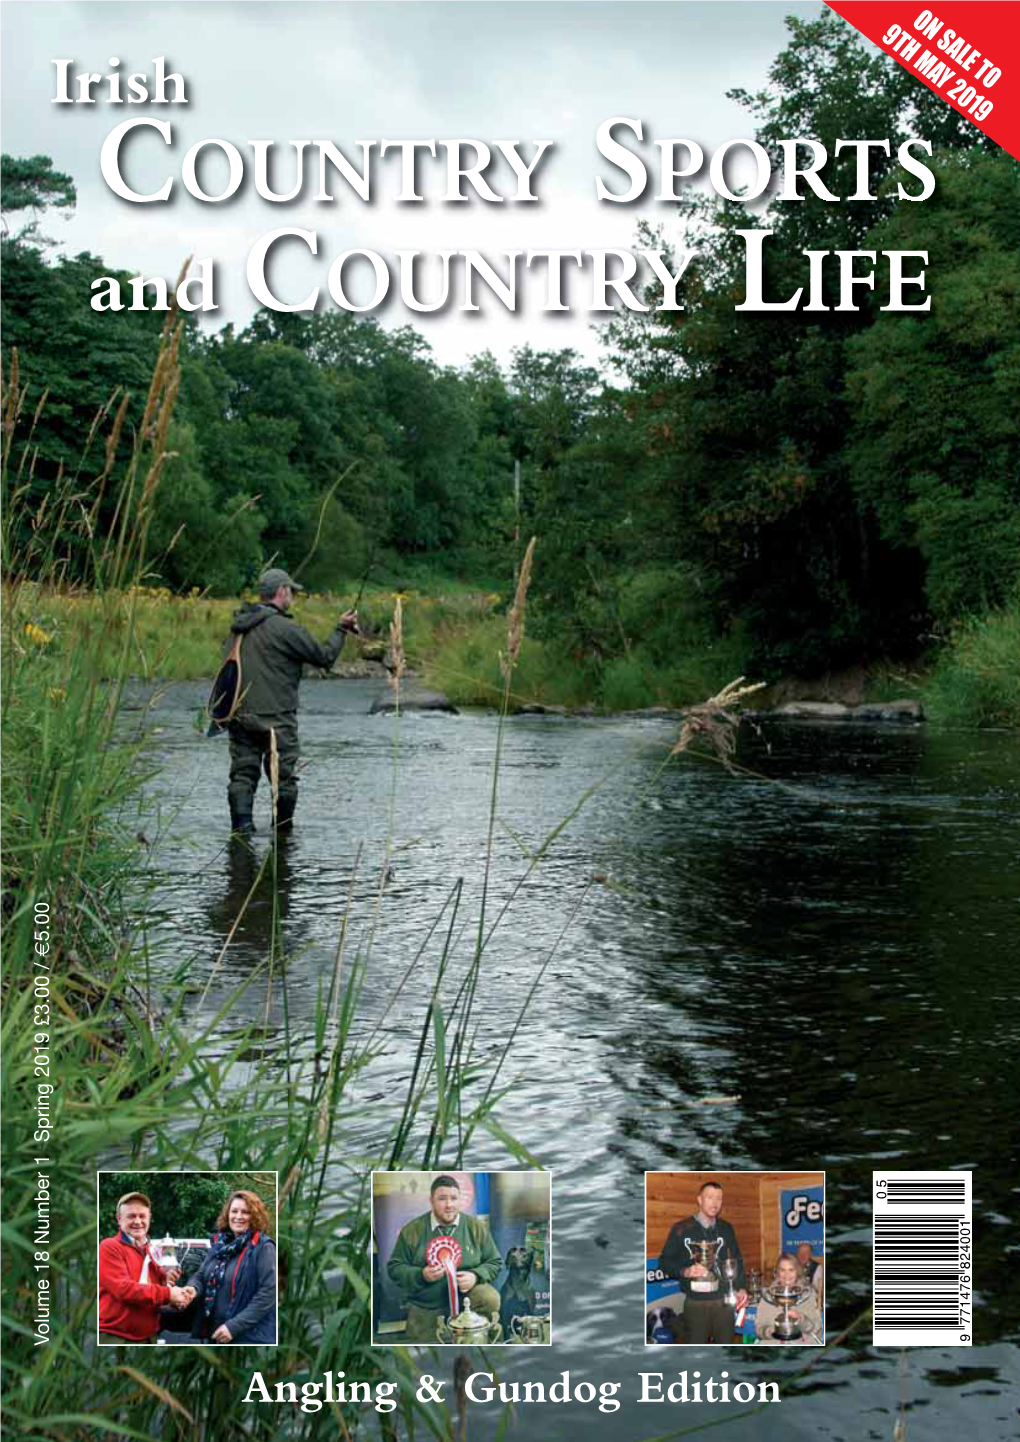 Spring 2019 £3.00 / 5.00 Irish and C OUNTRY C Angling &Gundog Edition OUNTRY S PORTS L